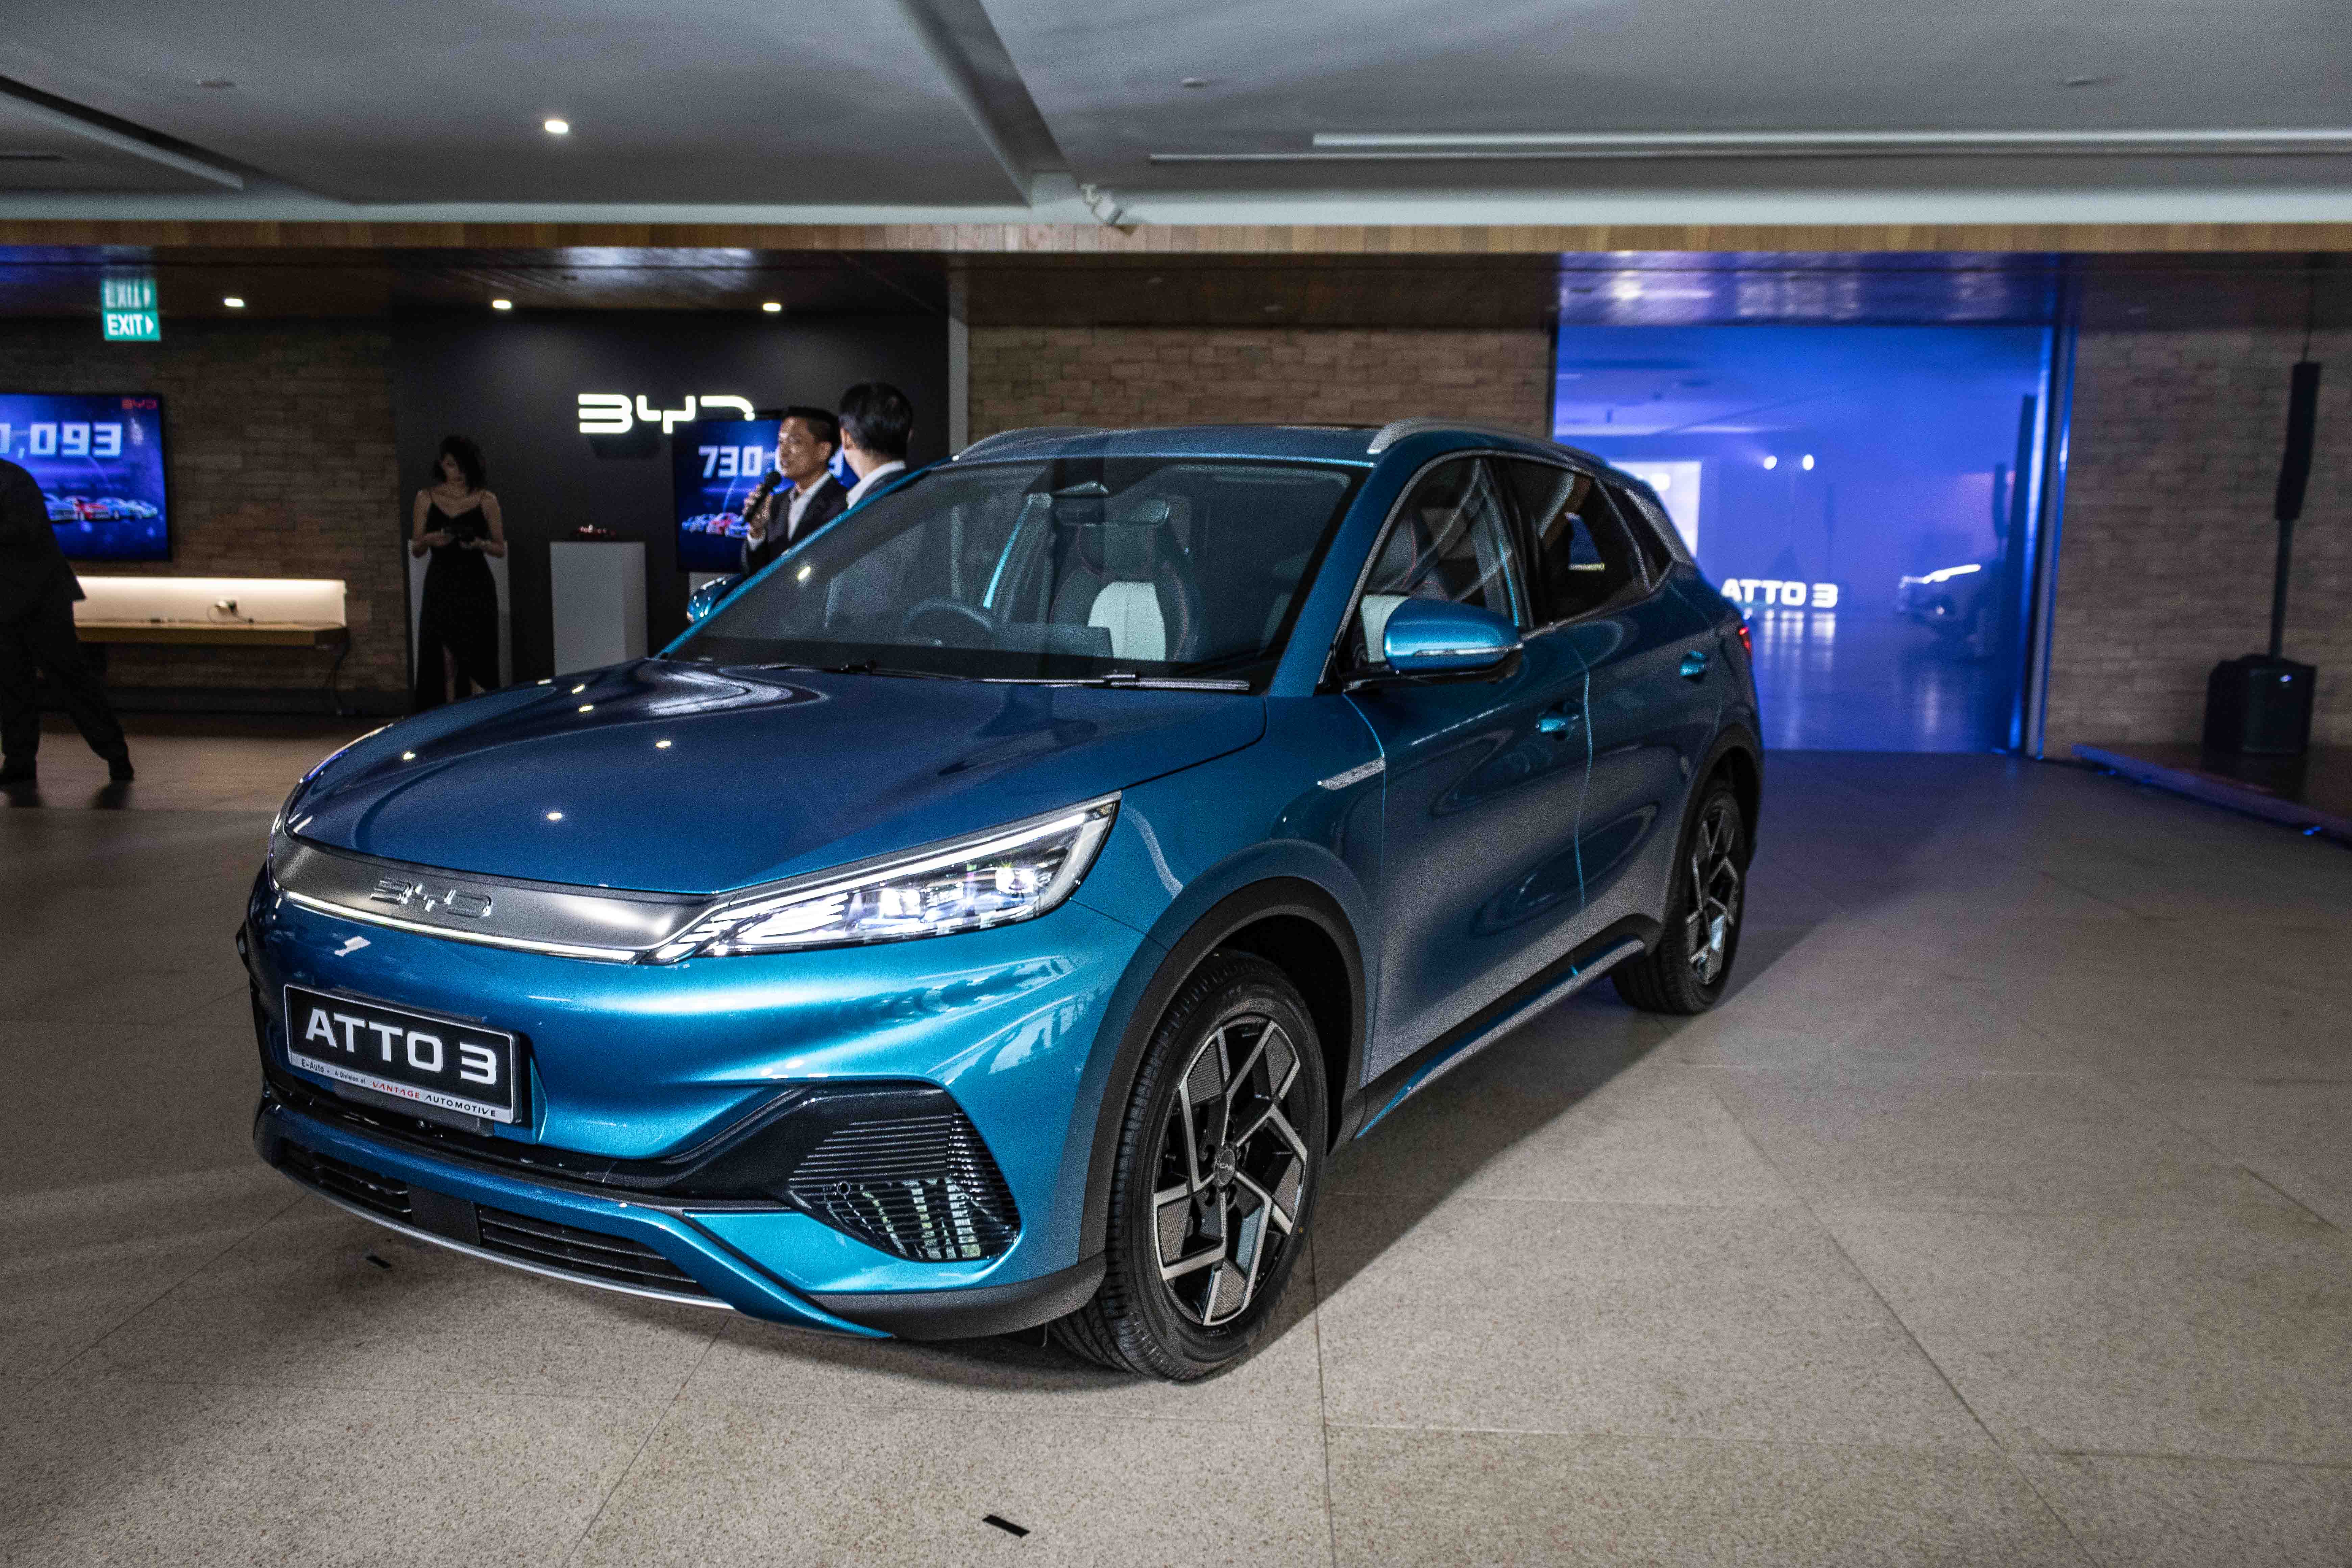 Byds Newest Suv The Atto 3 Ev Launched In Singapore Topgear Singapore 3599